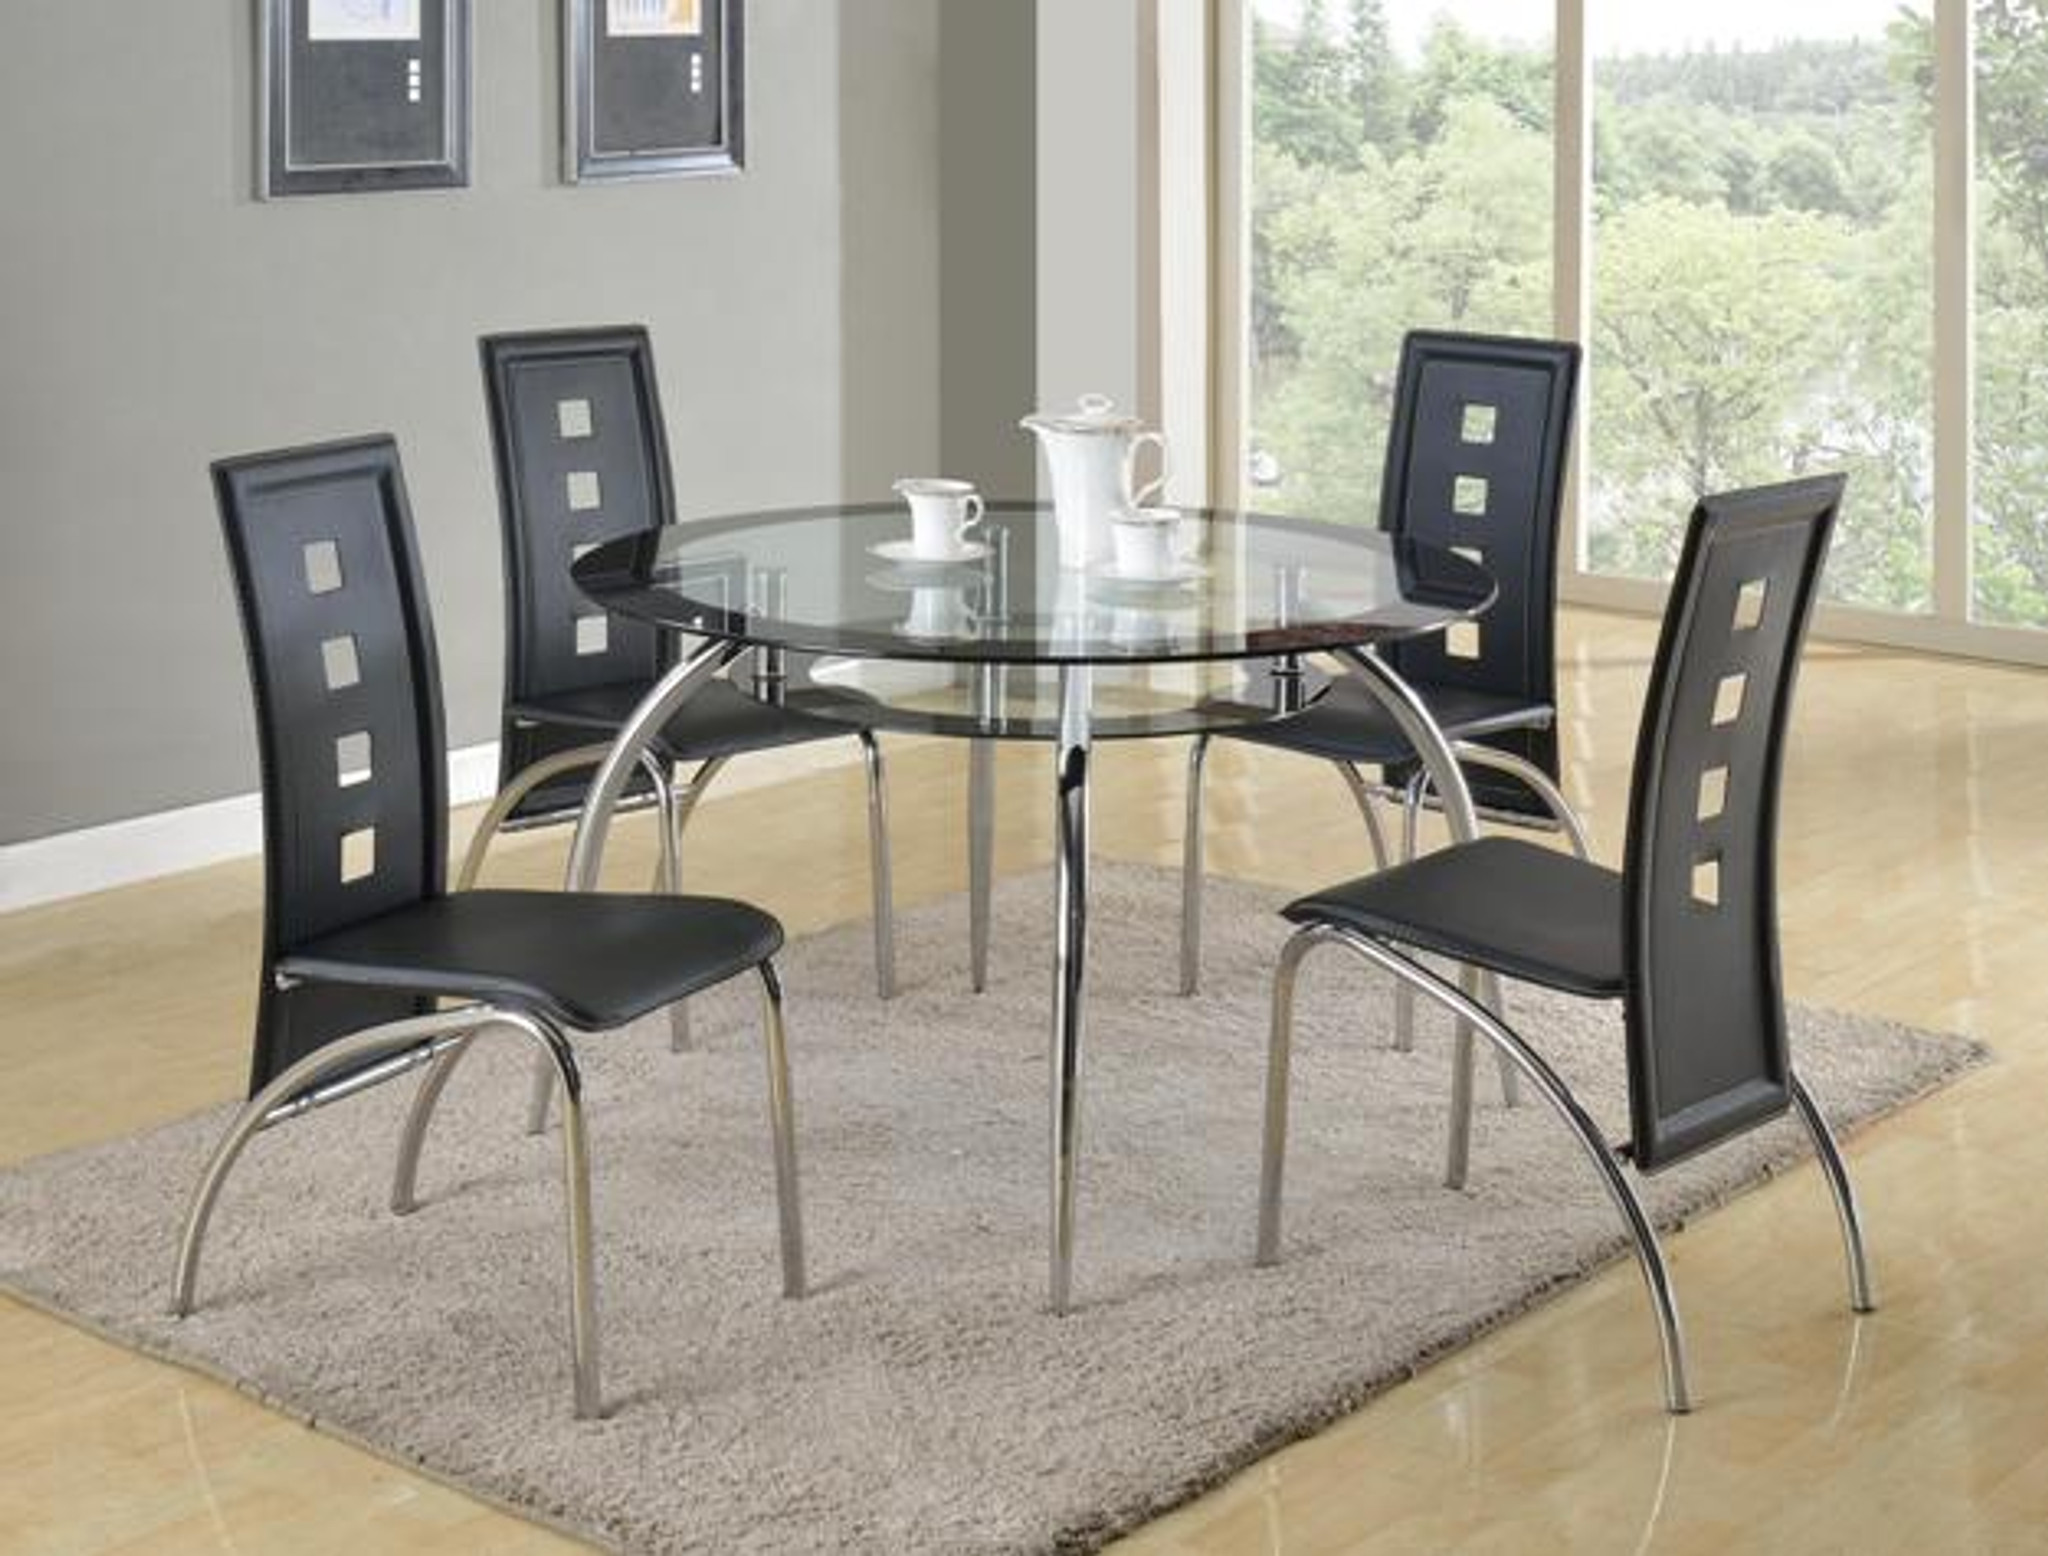 Dining Room Table Set Round Glass Kitchen Tables And Chairs Sets Modern 5 Piece Dining Sets Home Garden